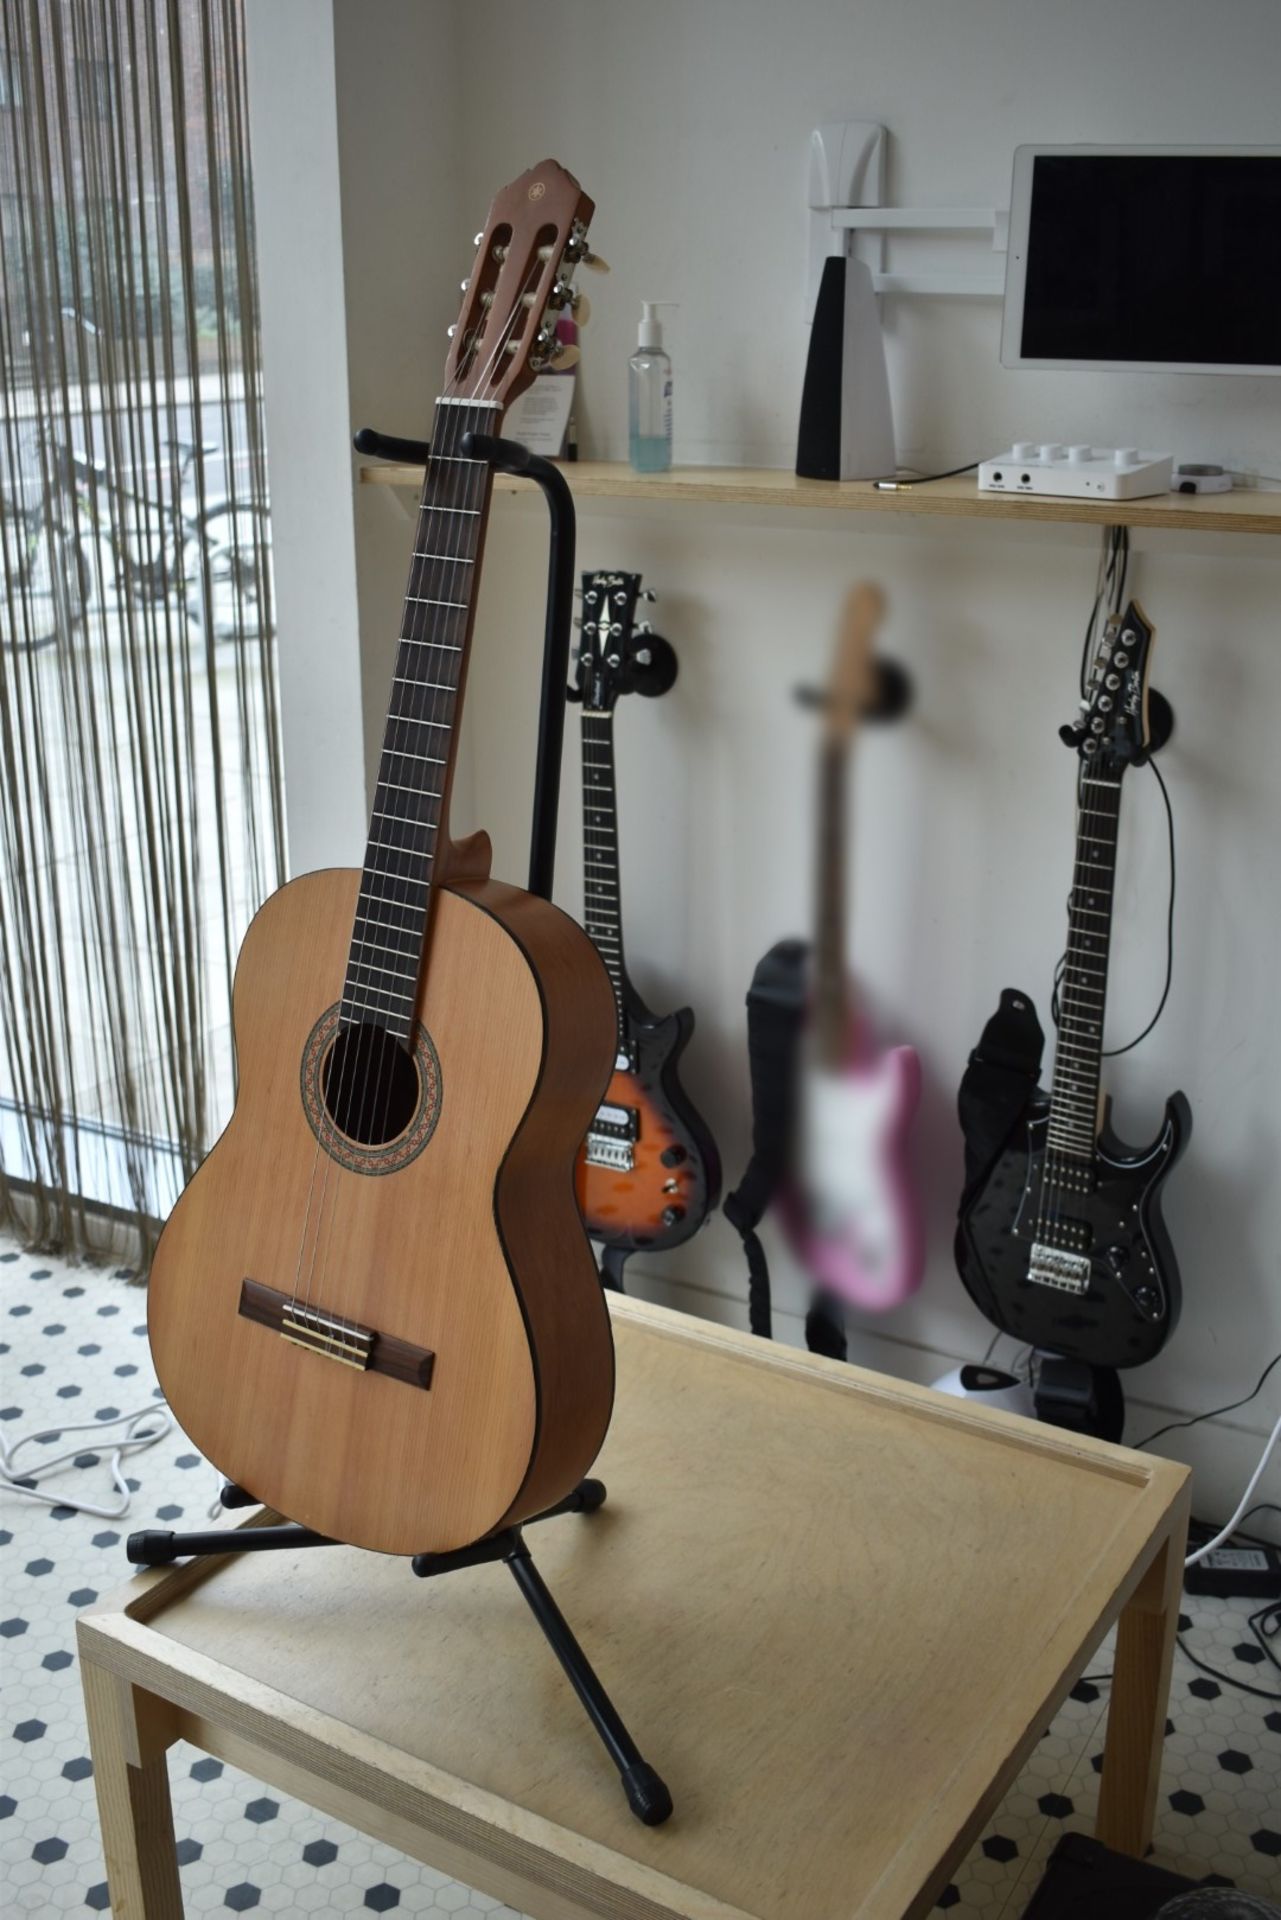 3 x Childrens Guitars to Include 2 x Electric Guitars and 1 x Classical Guitar - Ref KP101 - CL489 - - Image 6 of 6